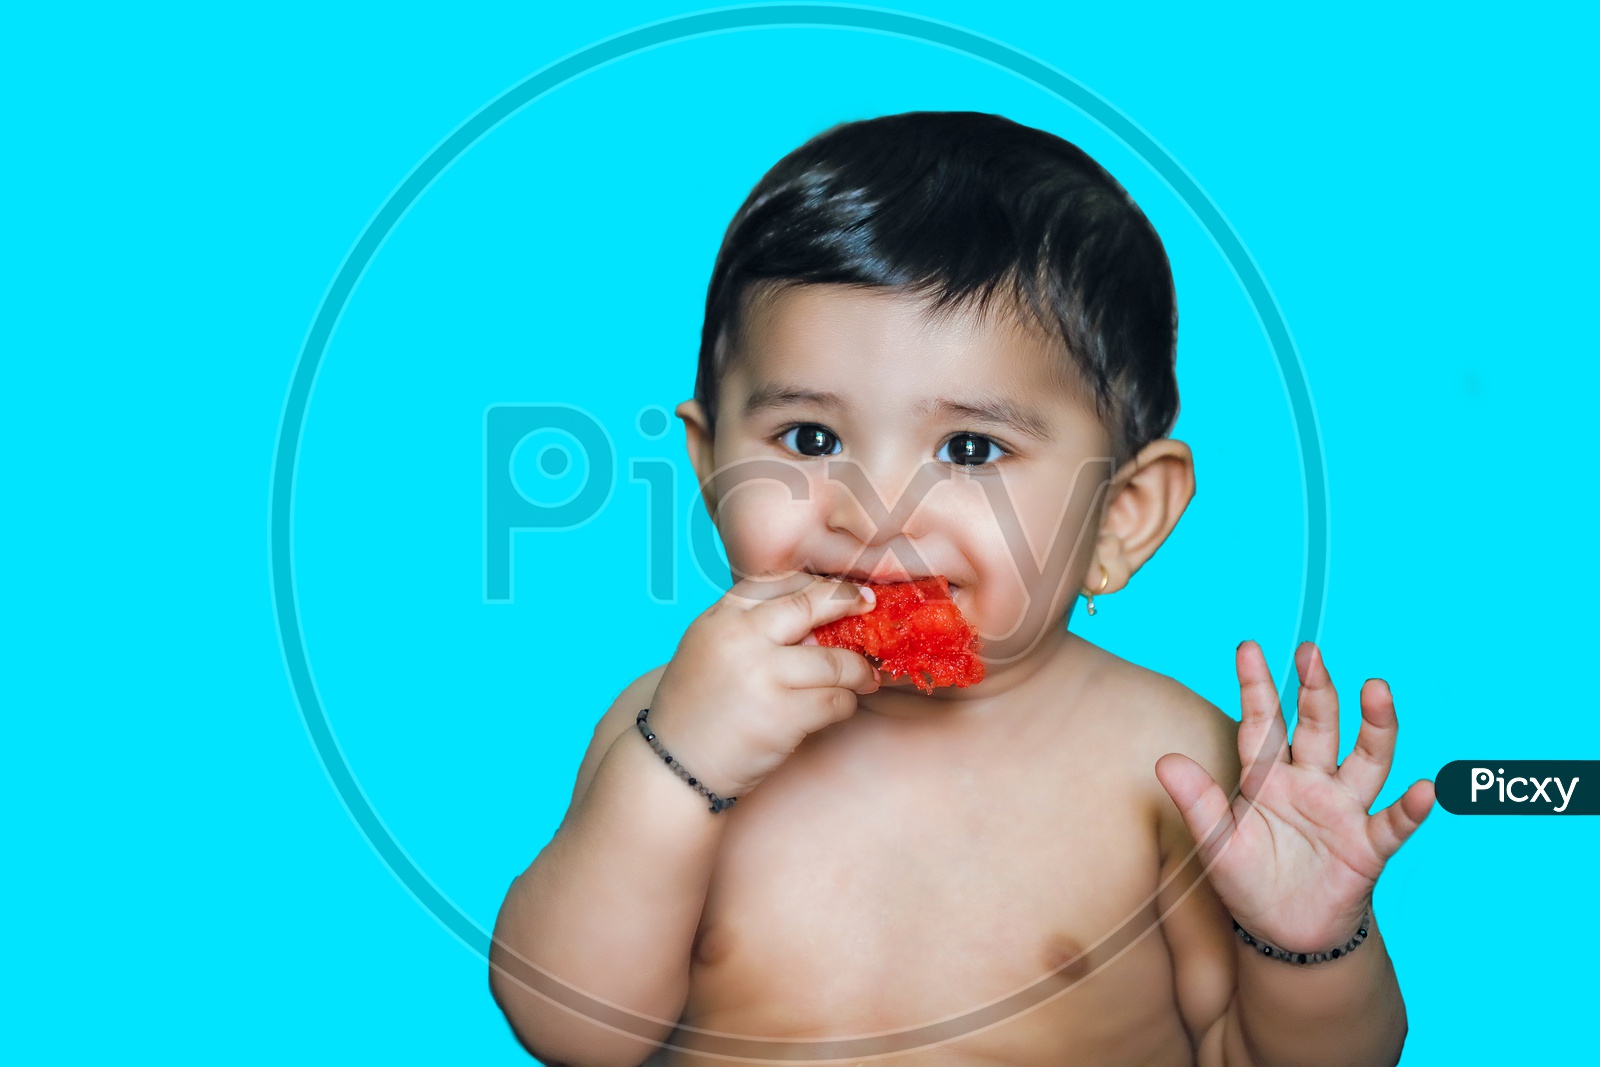 Indian baby Boy With Smiling Face Closeup Shot eating watermelon fruit